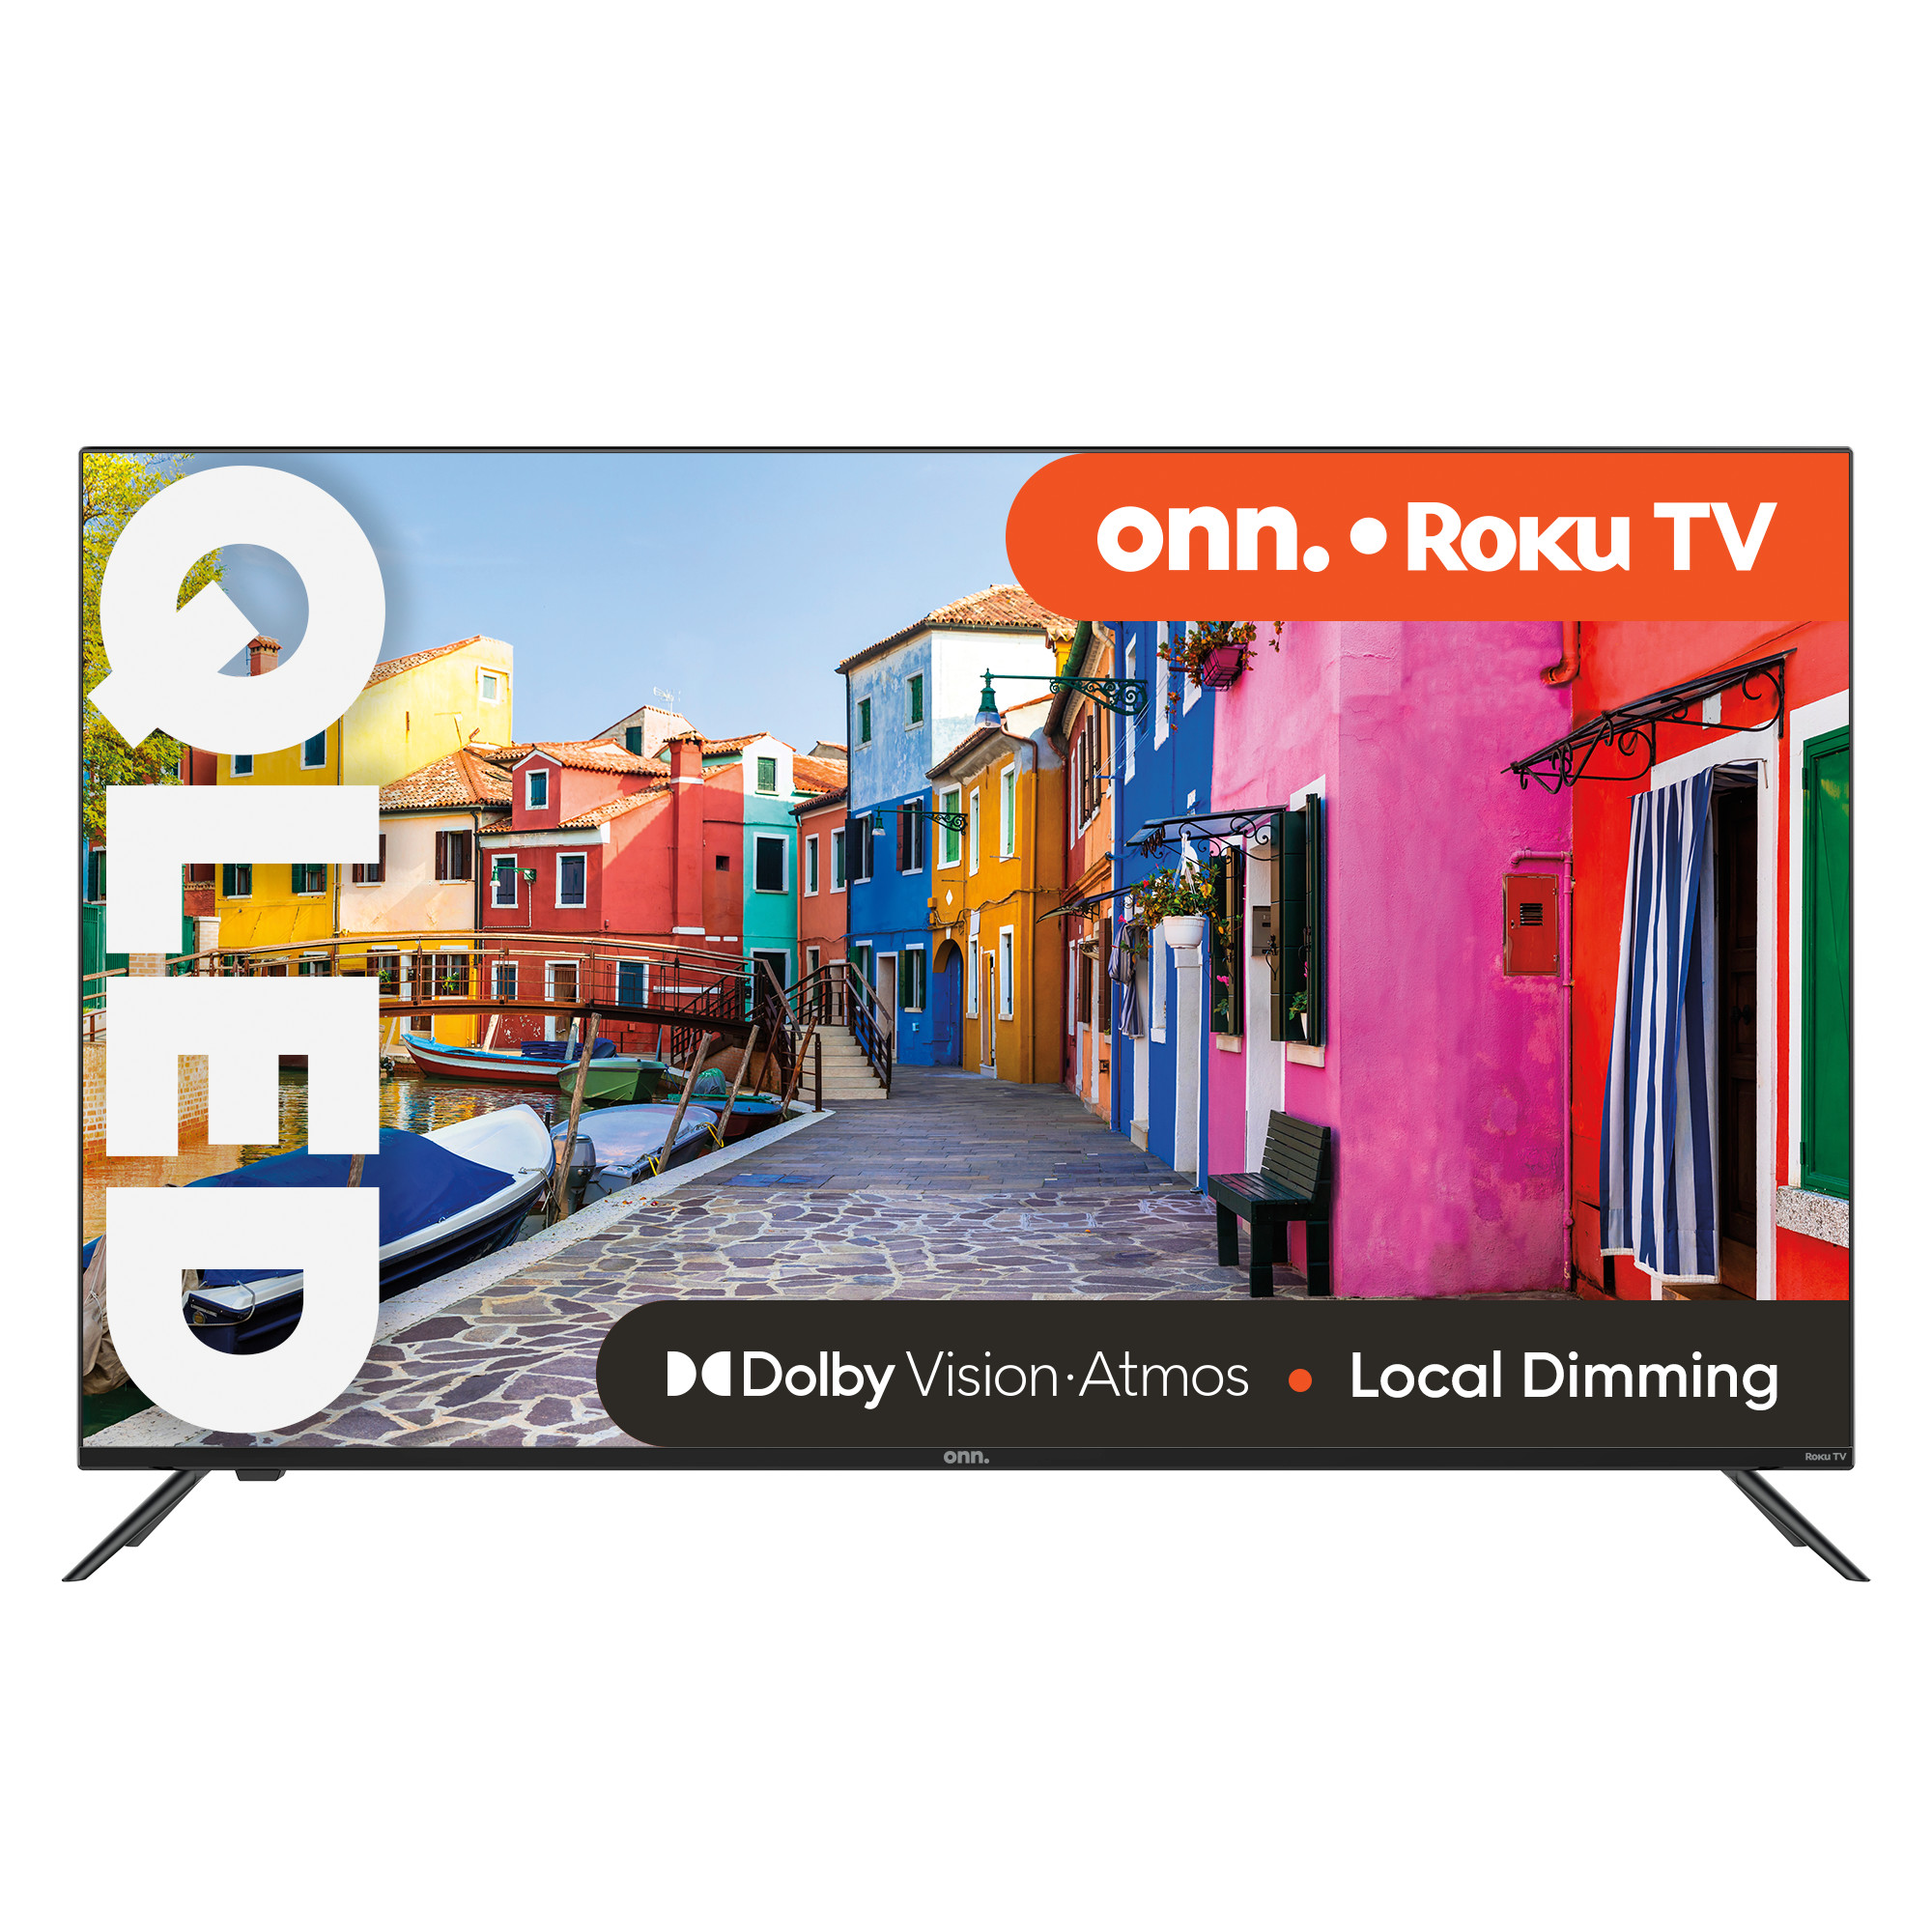 onn. 50” QLED 4K UHD (2160p) Roku Smart TV with Dolby Atmos, Dolby Vision, Local Dimming, 120hz Effective Refresh Rate, and HDR (100071700) - image 1 of 17